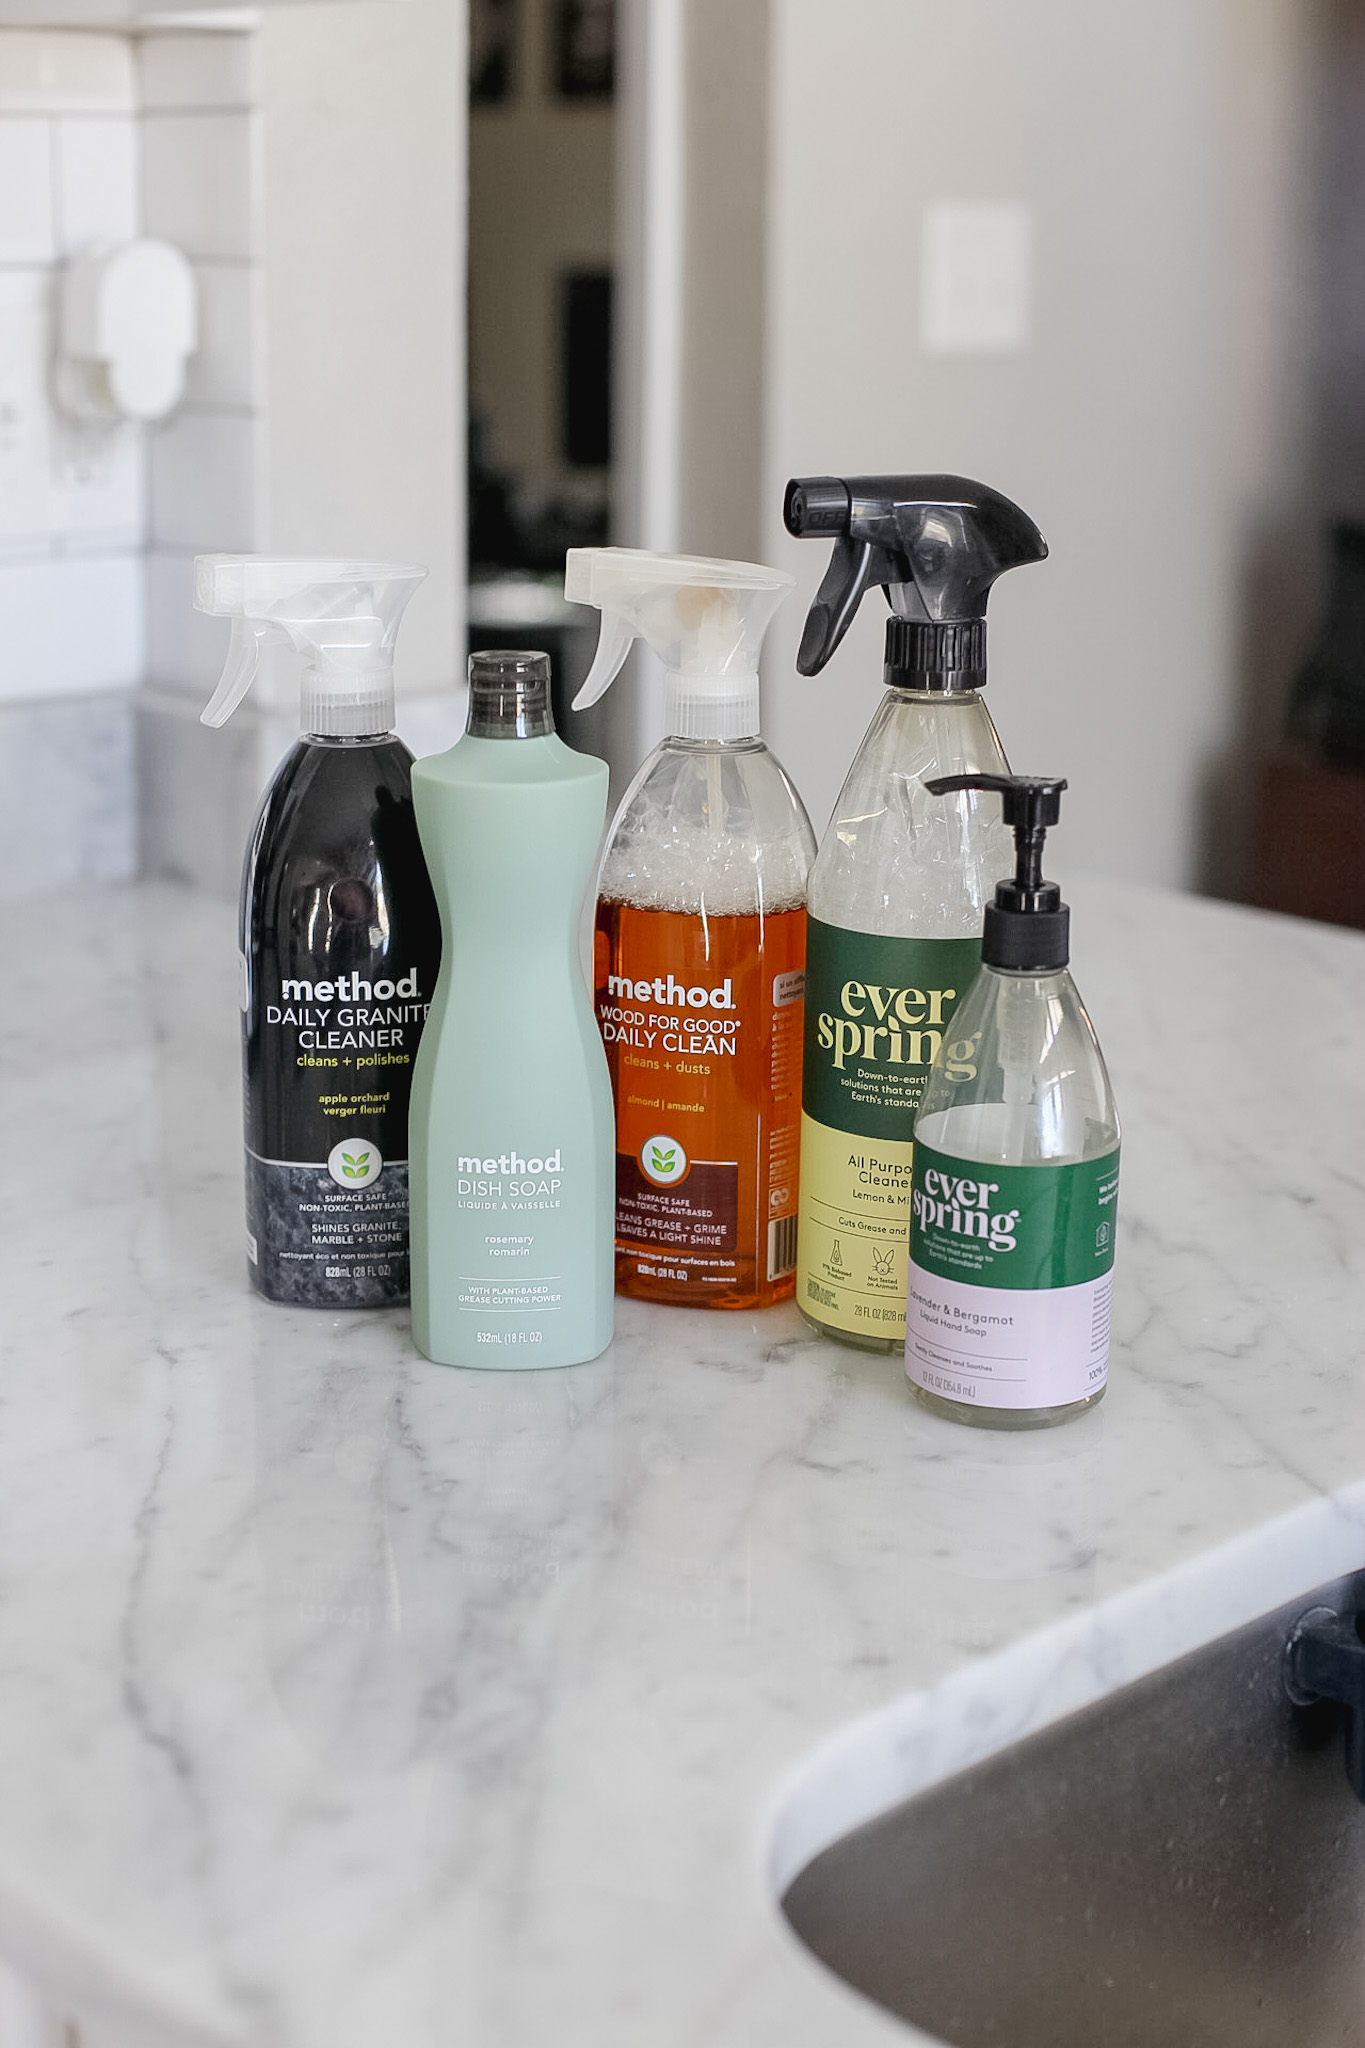 earthview cleaning products